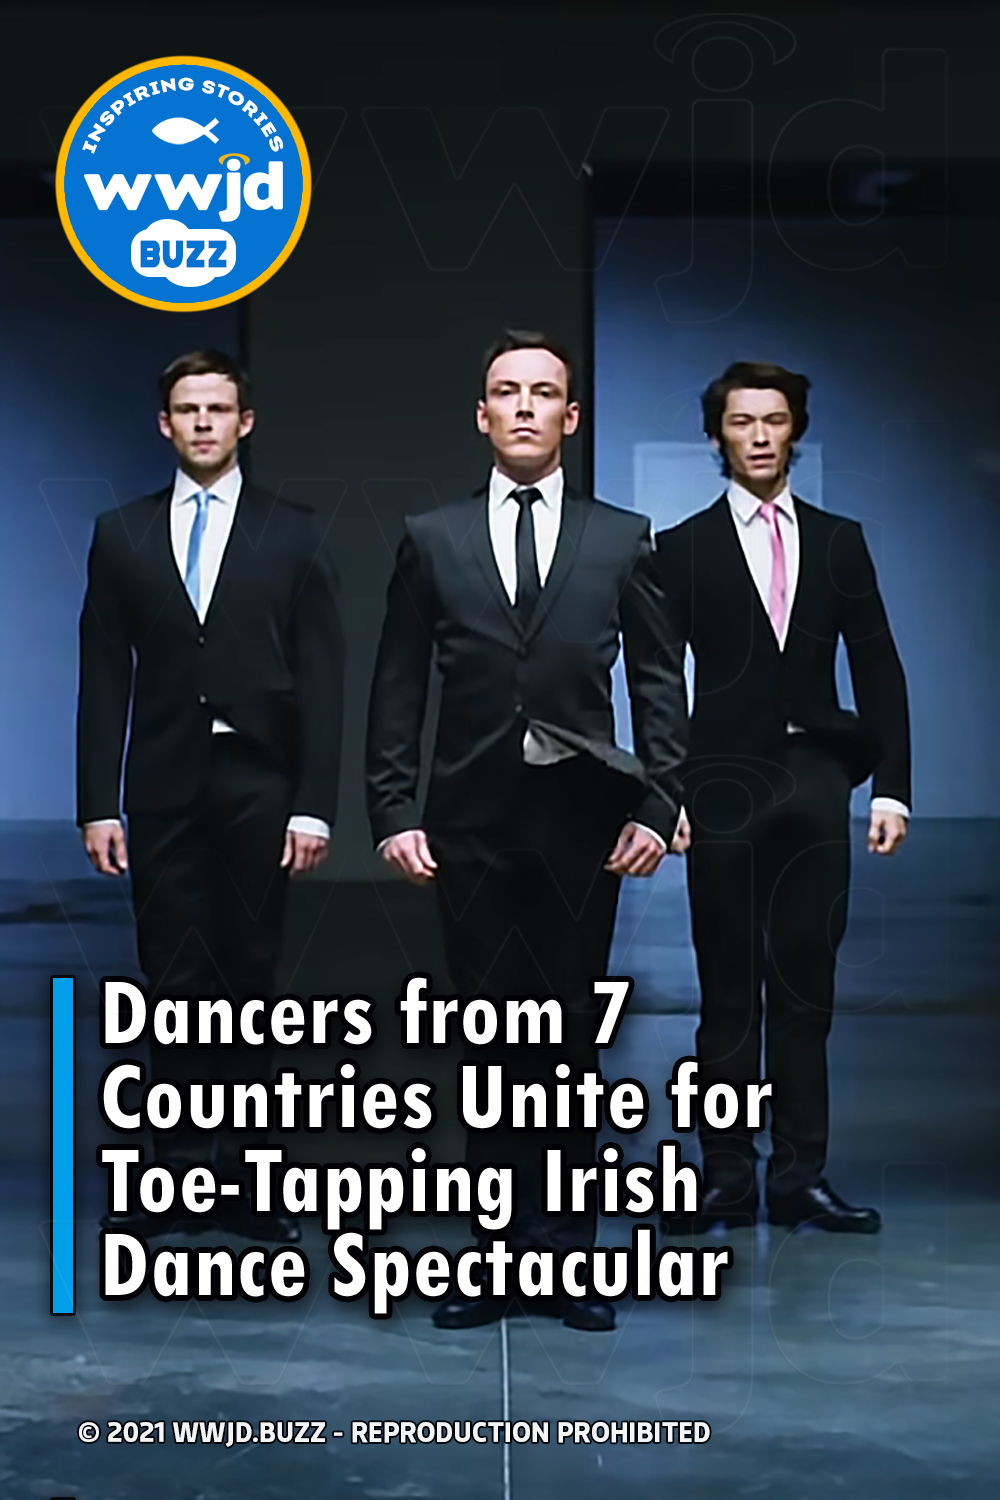 Dancers from 7 Countries Unite for Toe-Tapping Irish Dance Spectacular